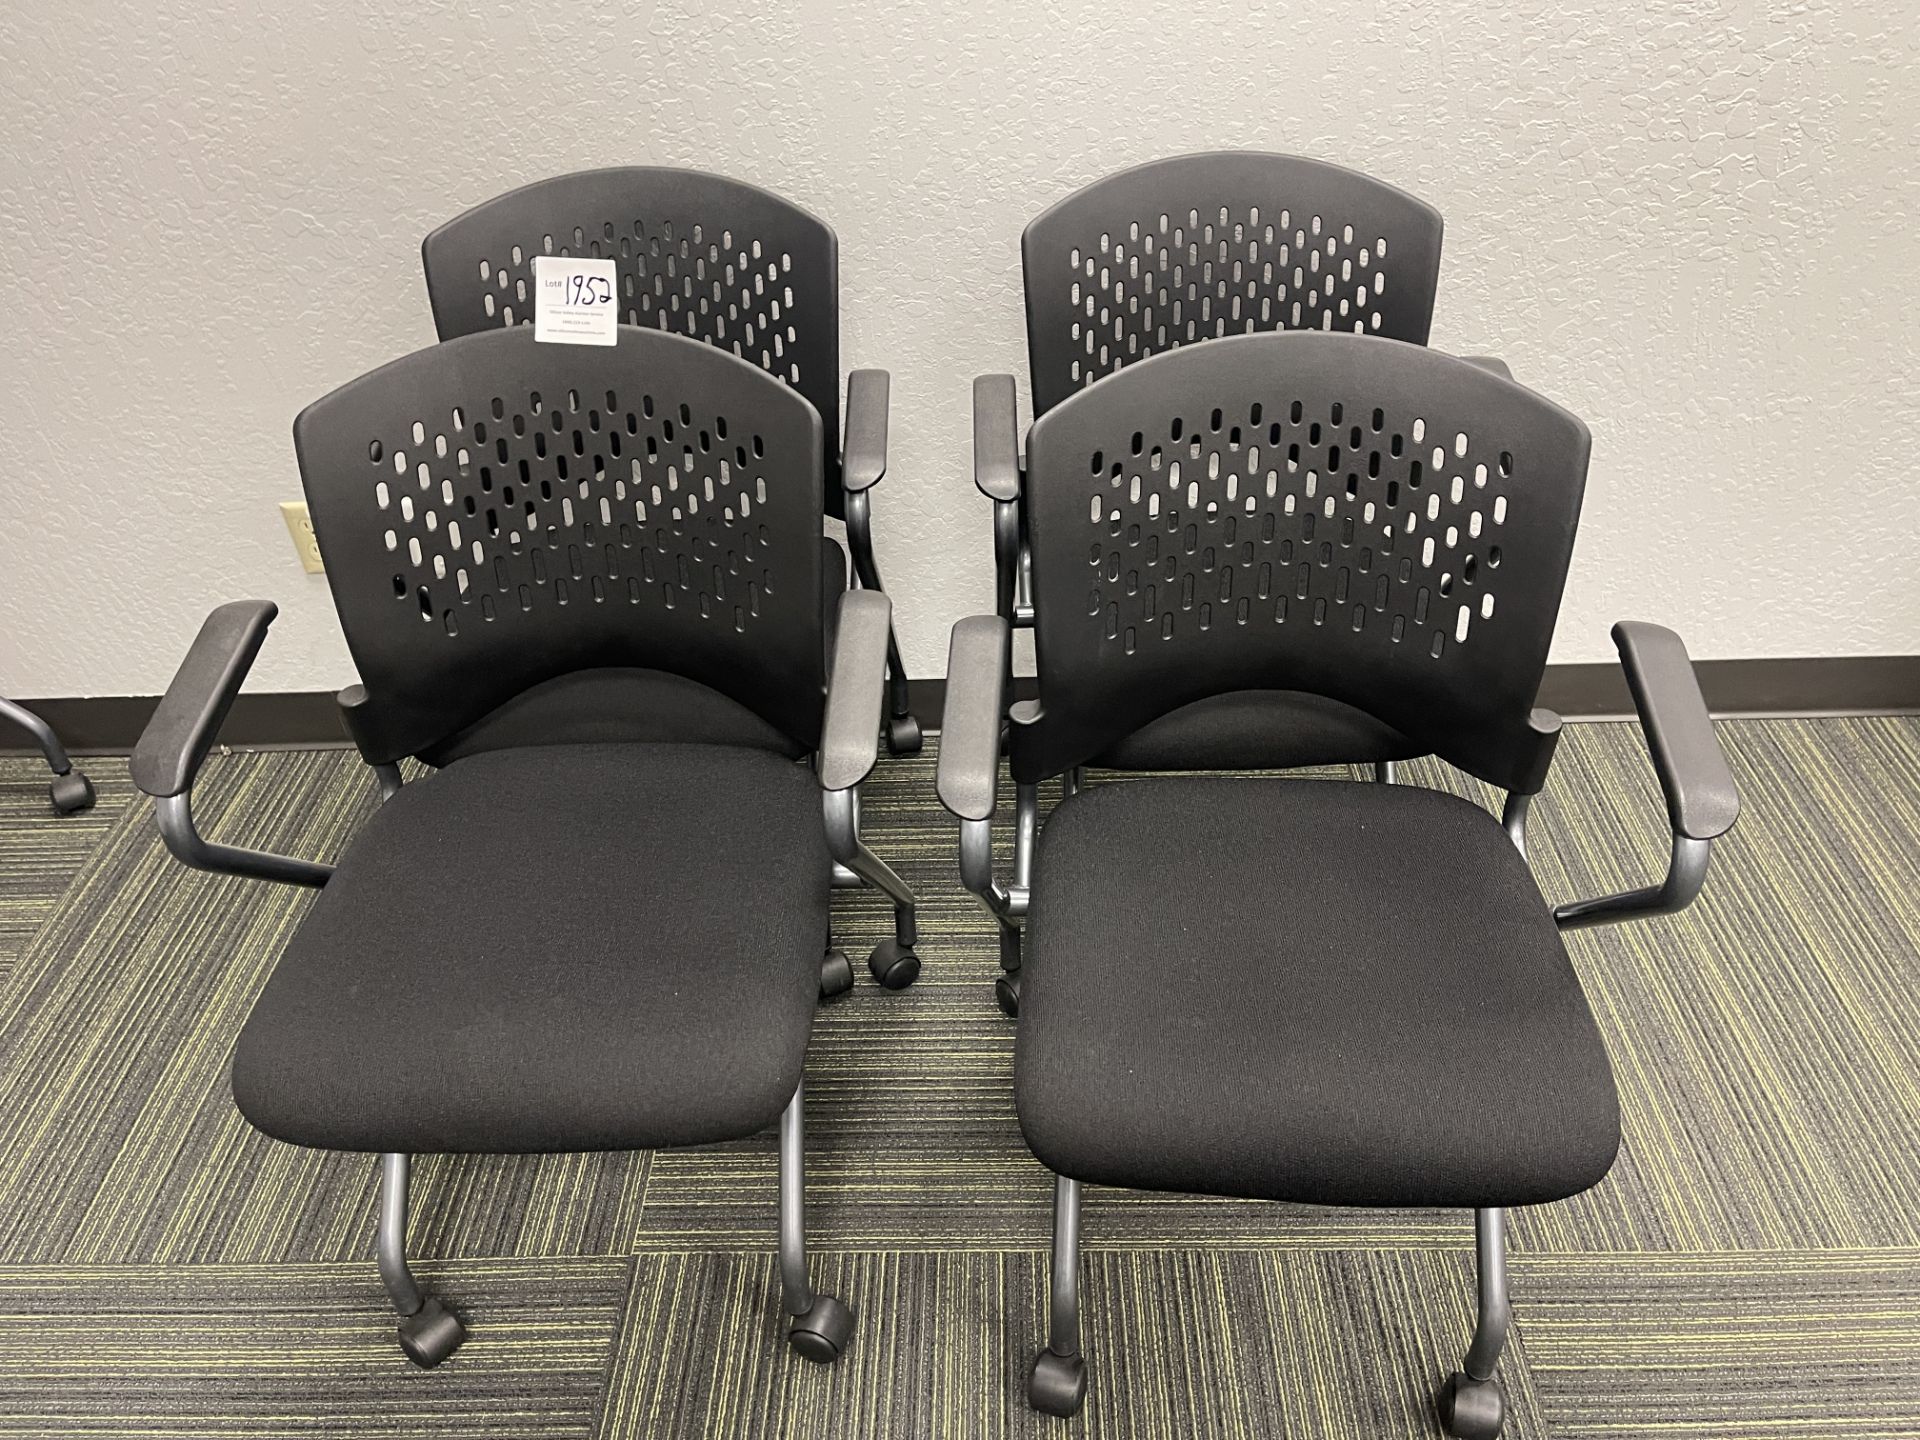 Four Black Desk Chairs with arms